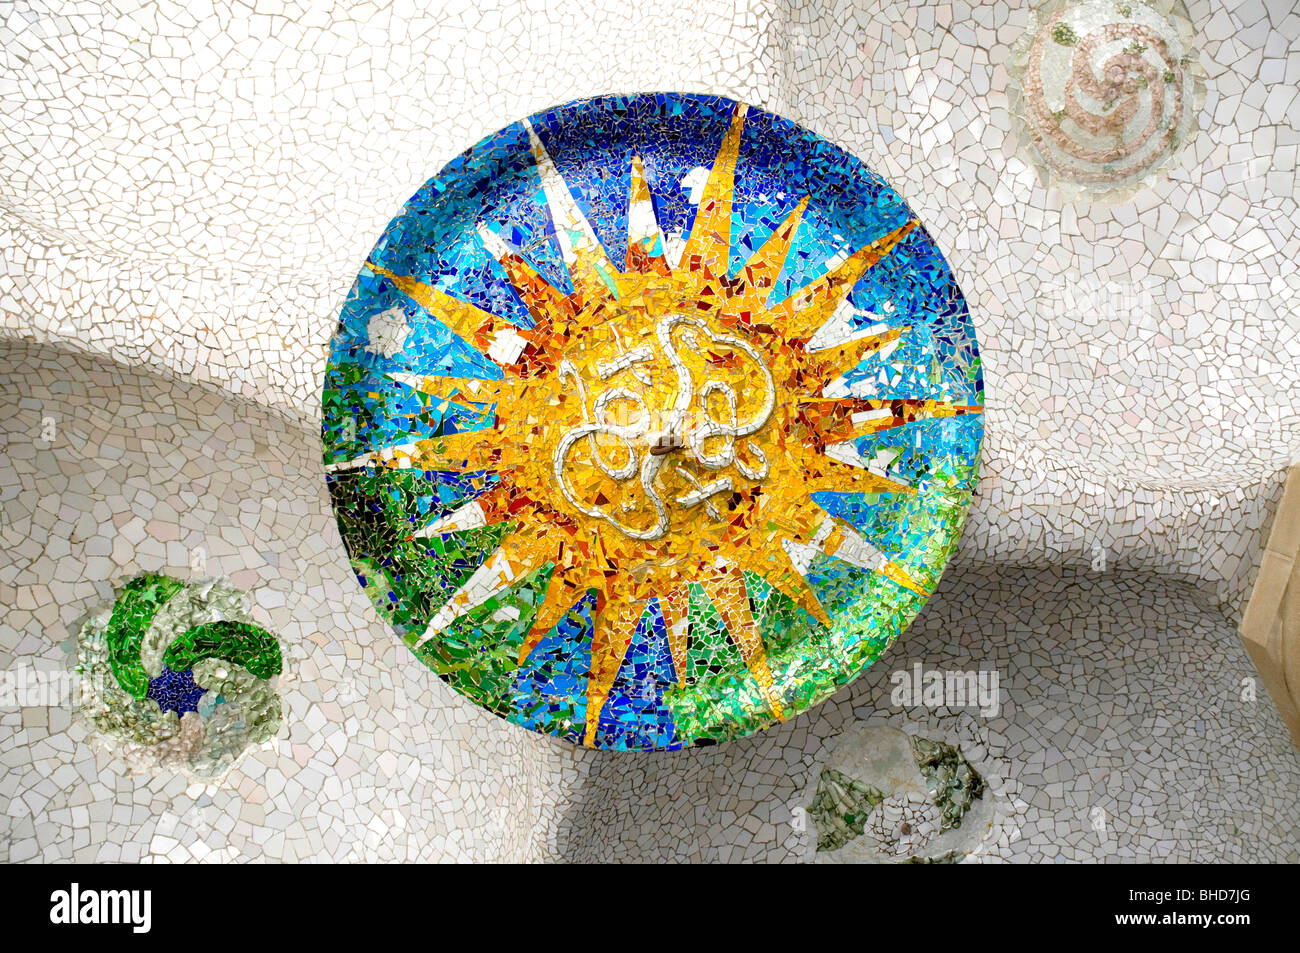 Unique tiled mosaic in parc guell, Barcelona, Spain Stock Photo